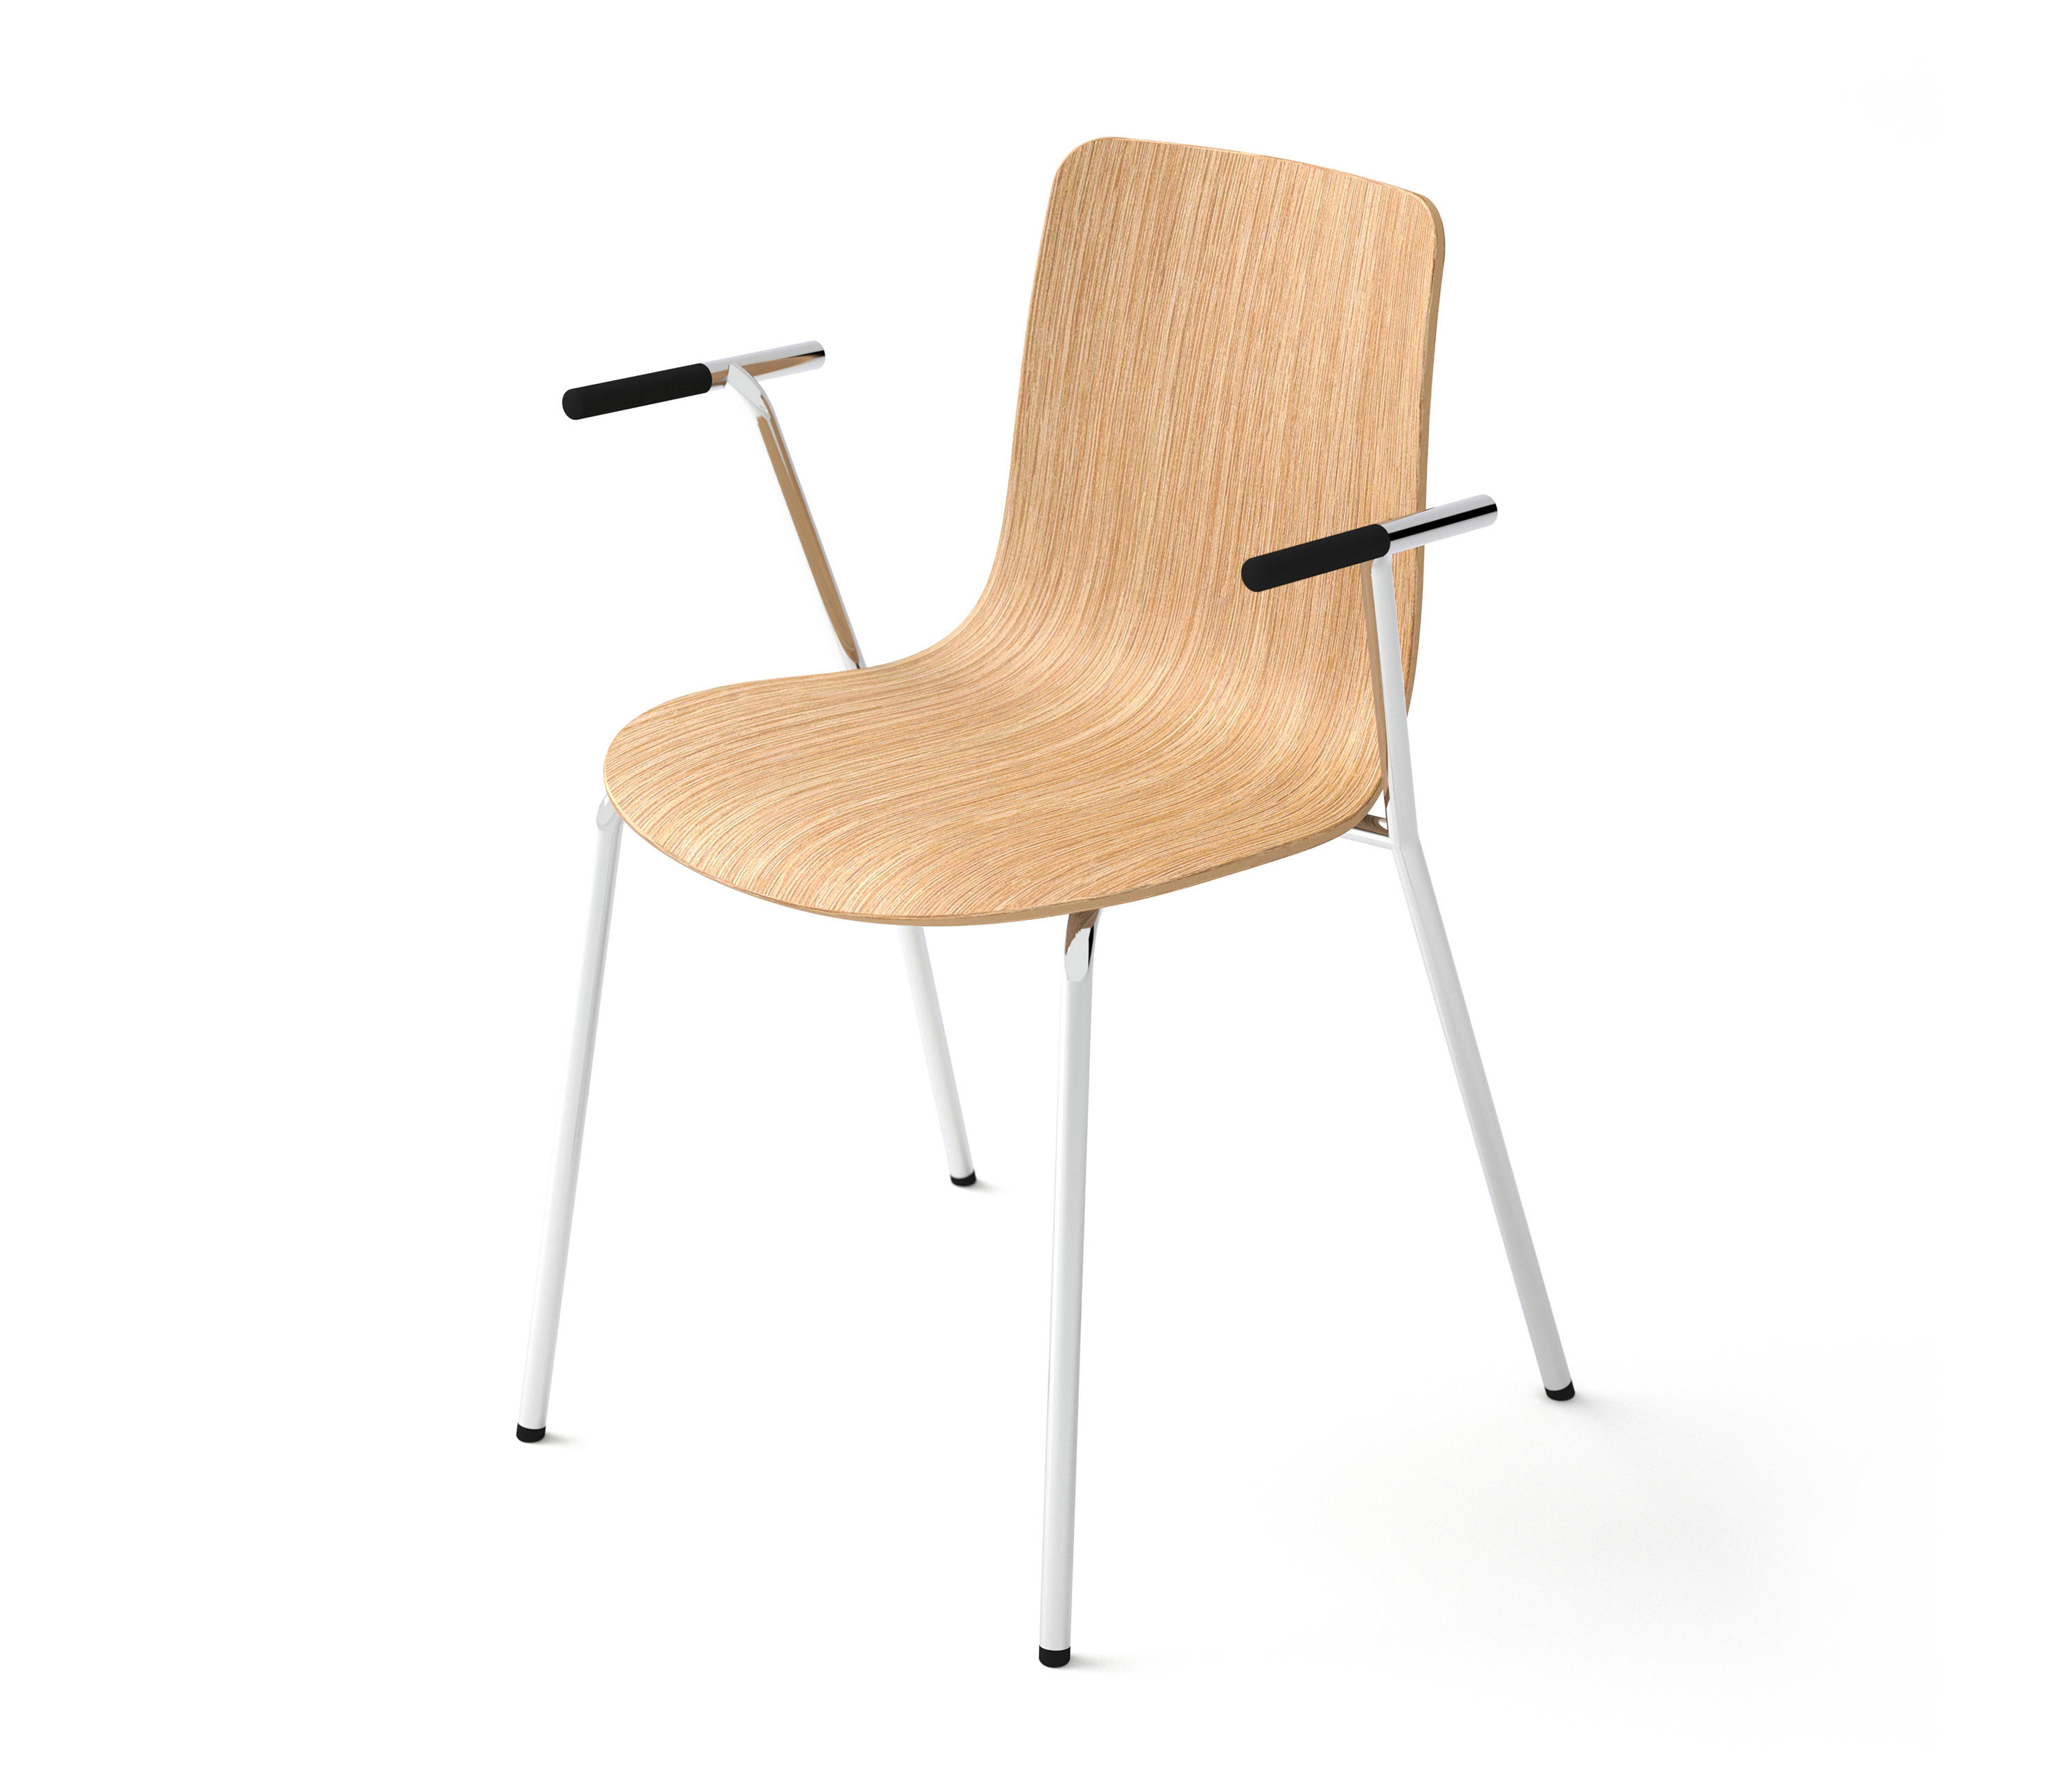 BASE CHAIR - Chairs from Horreds | Architonic